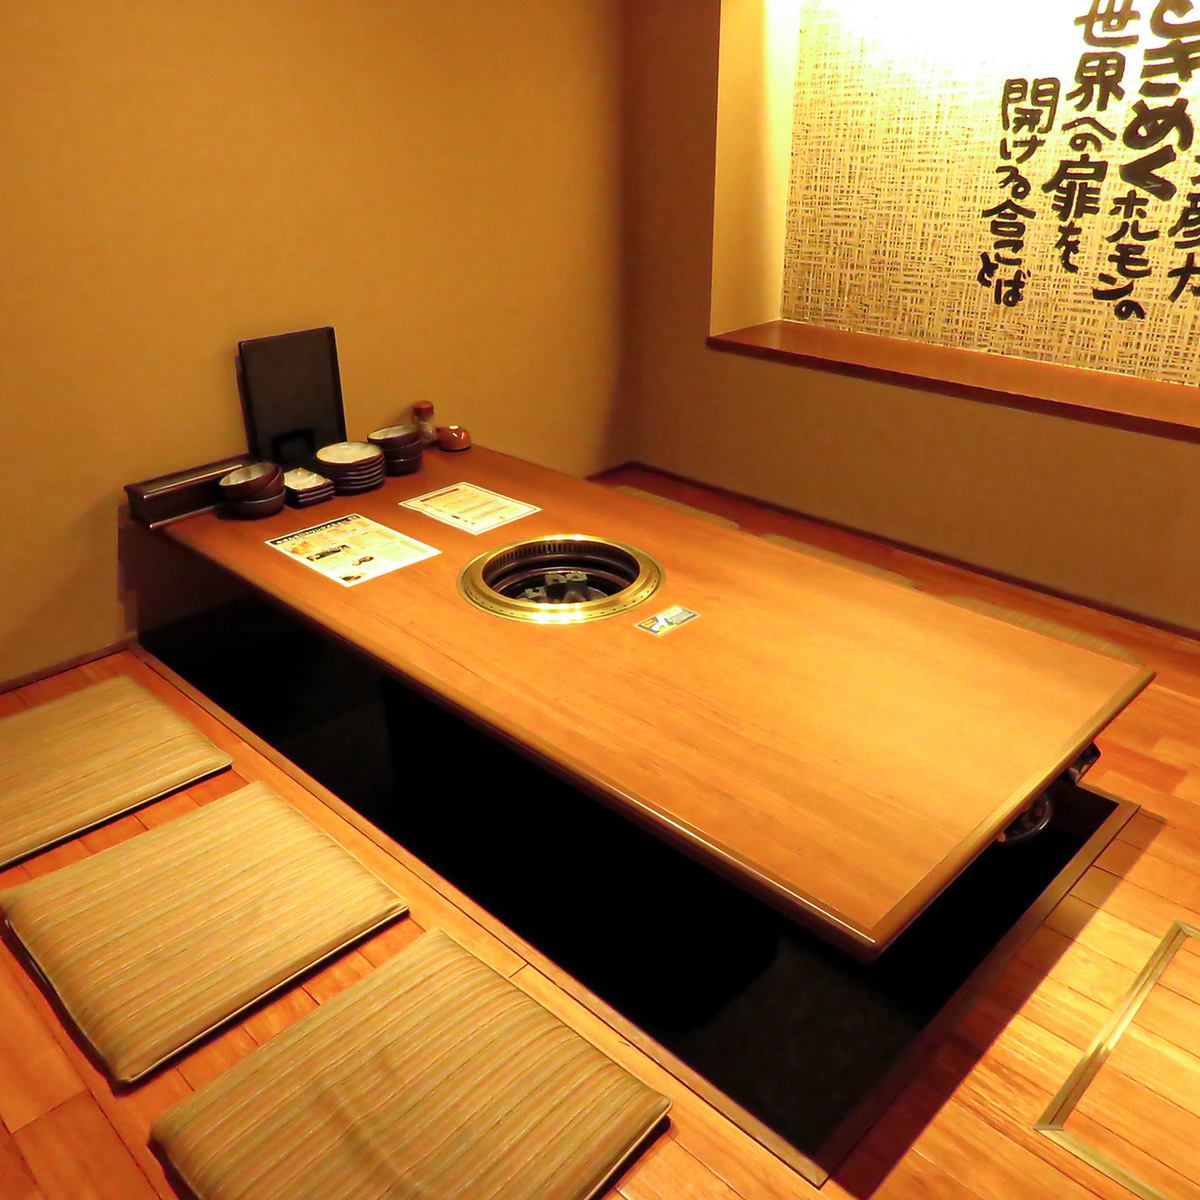 [Kuroge Wagyu beef carefully selected by meat professionals] Spacious sunken kotatsu seating for families.